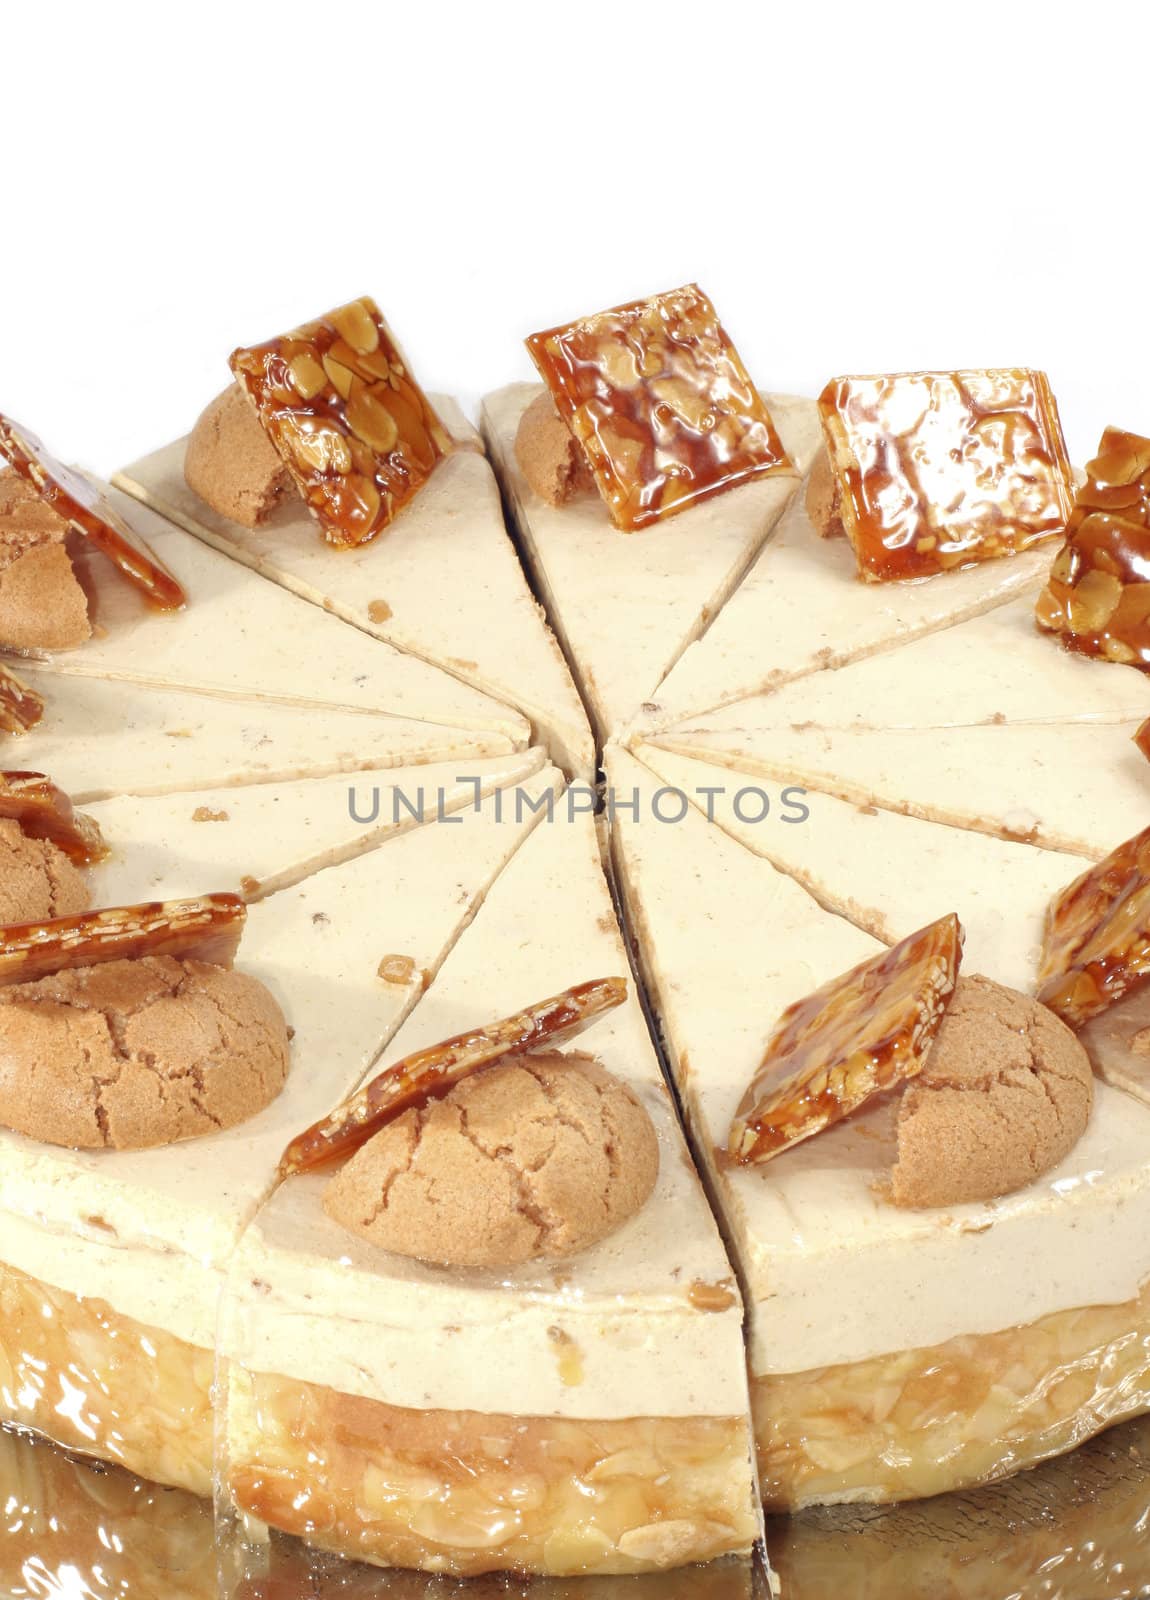 Nut cake with cream stuffing and peanuts in caramels